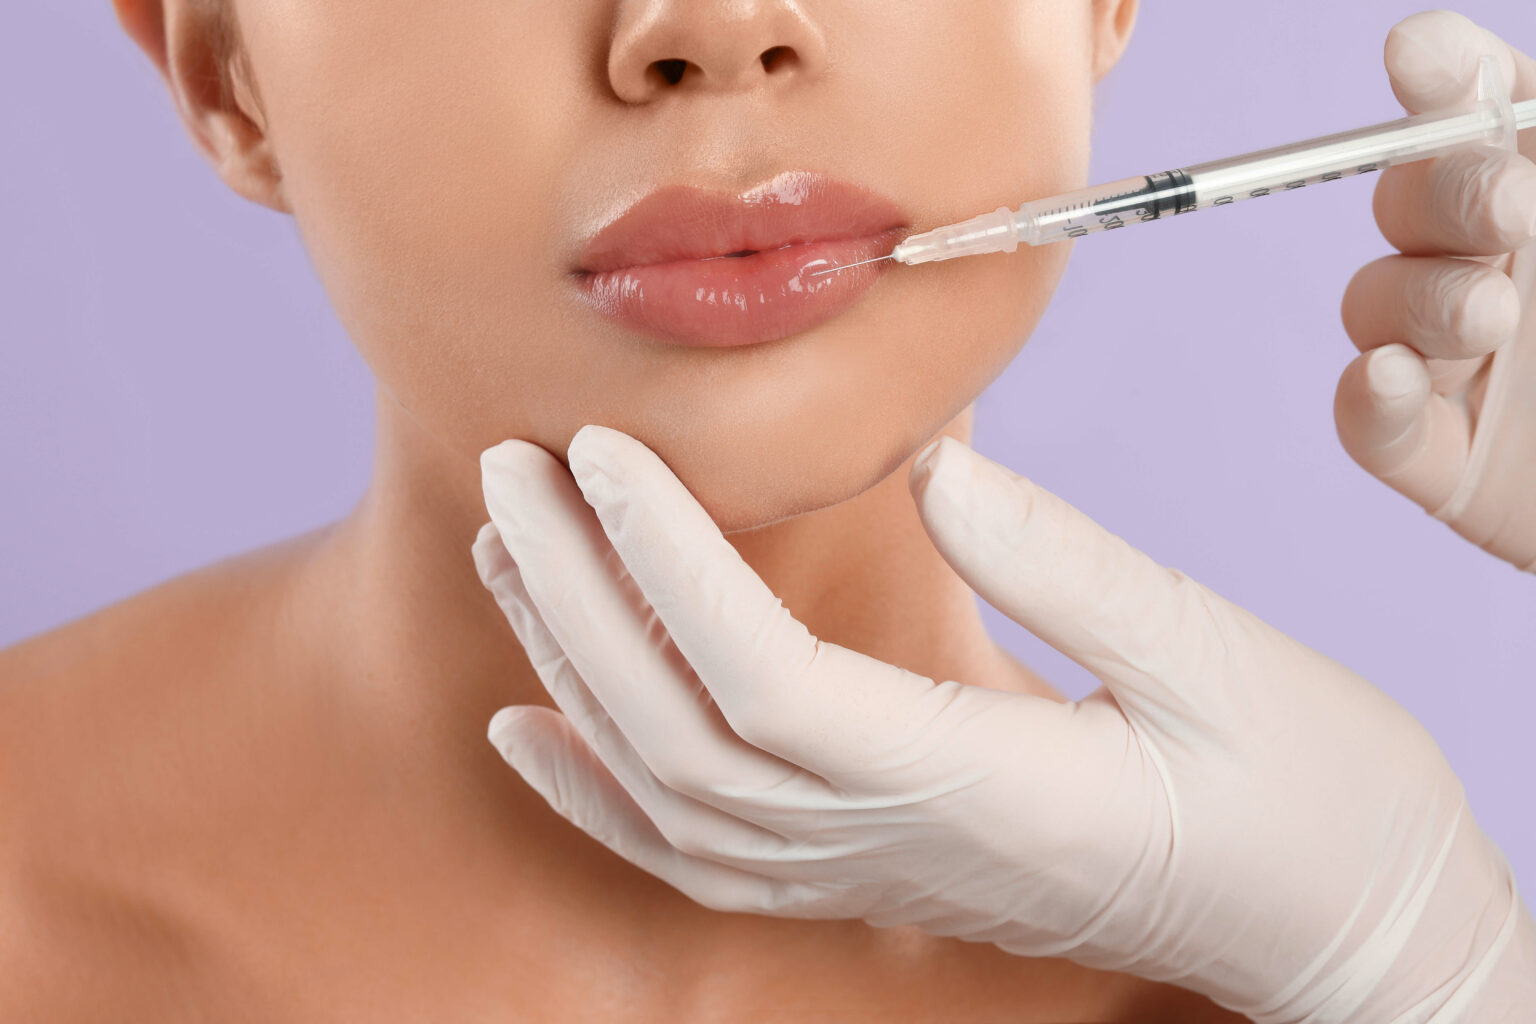 Finding the Right Dermal Filler Provider in Eau Claire: Tips and Recommendations